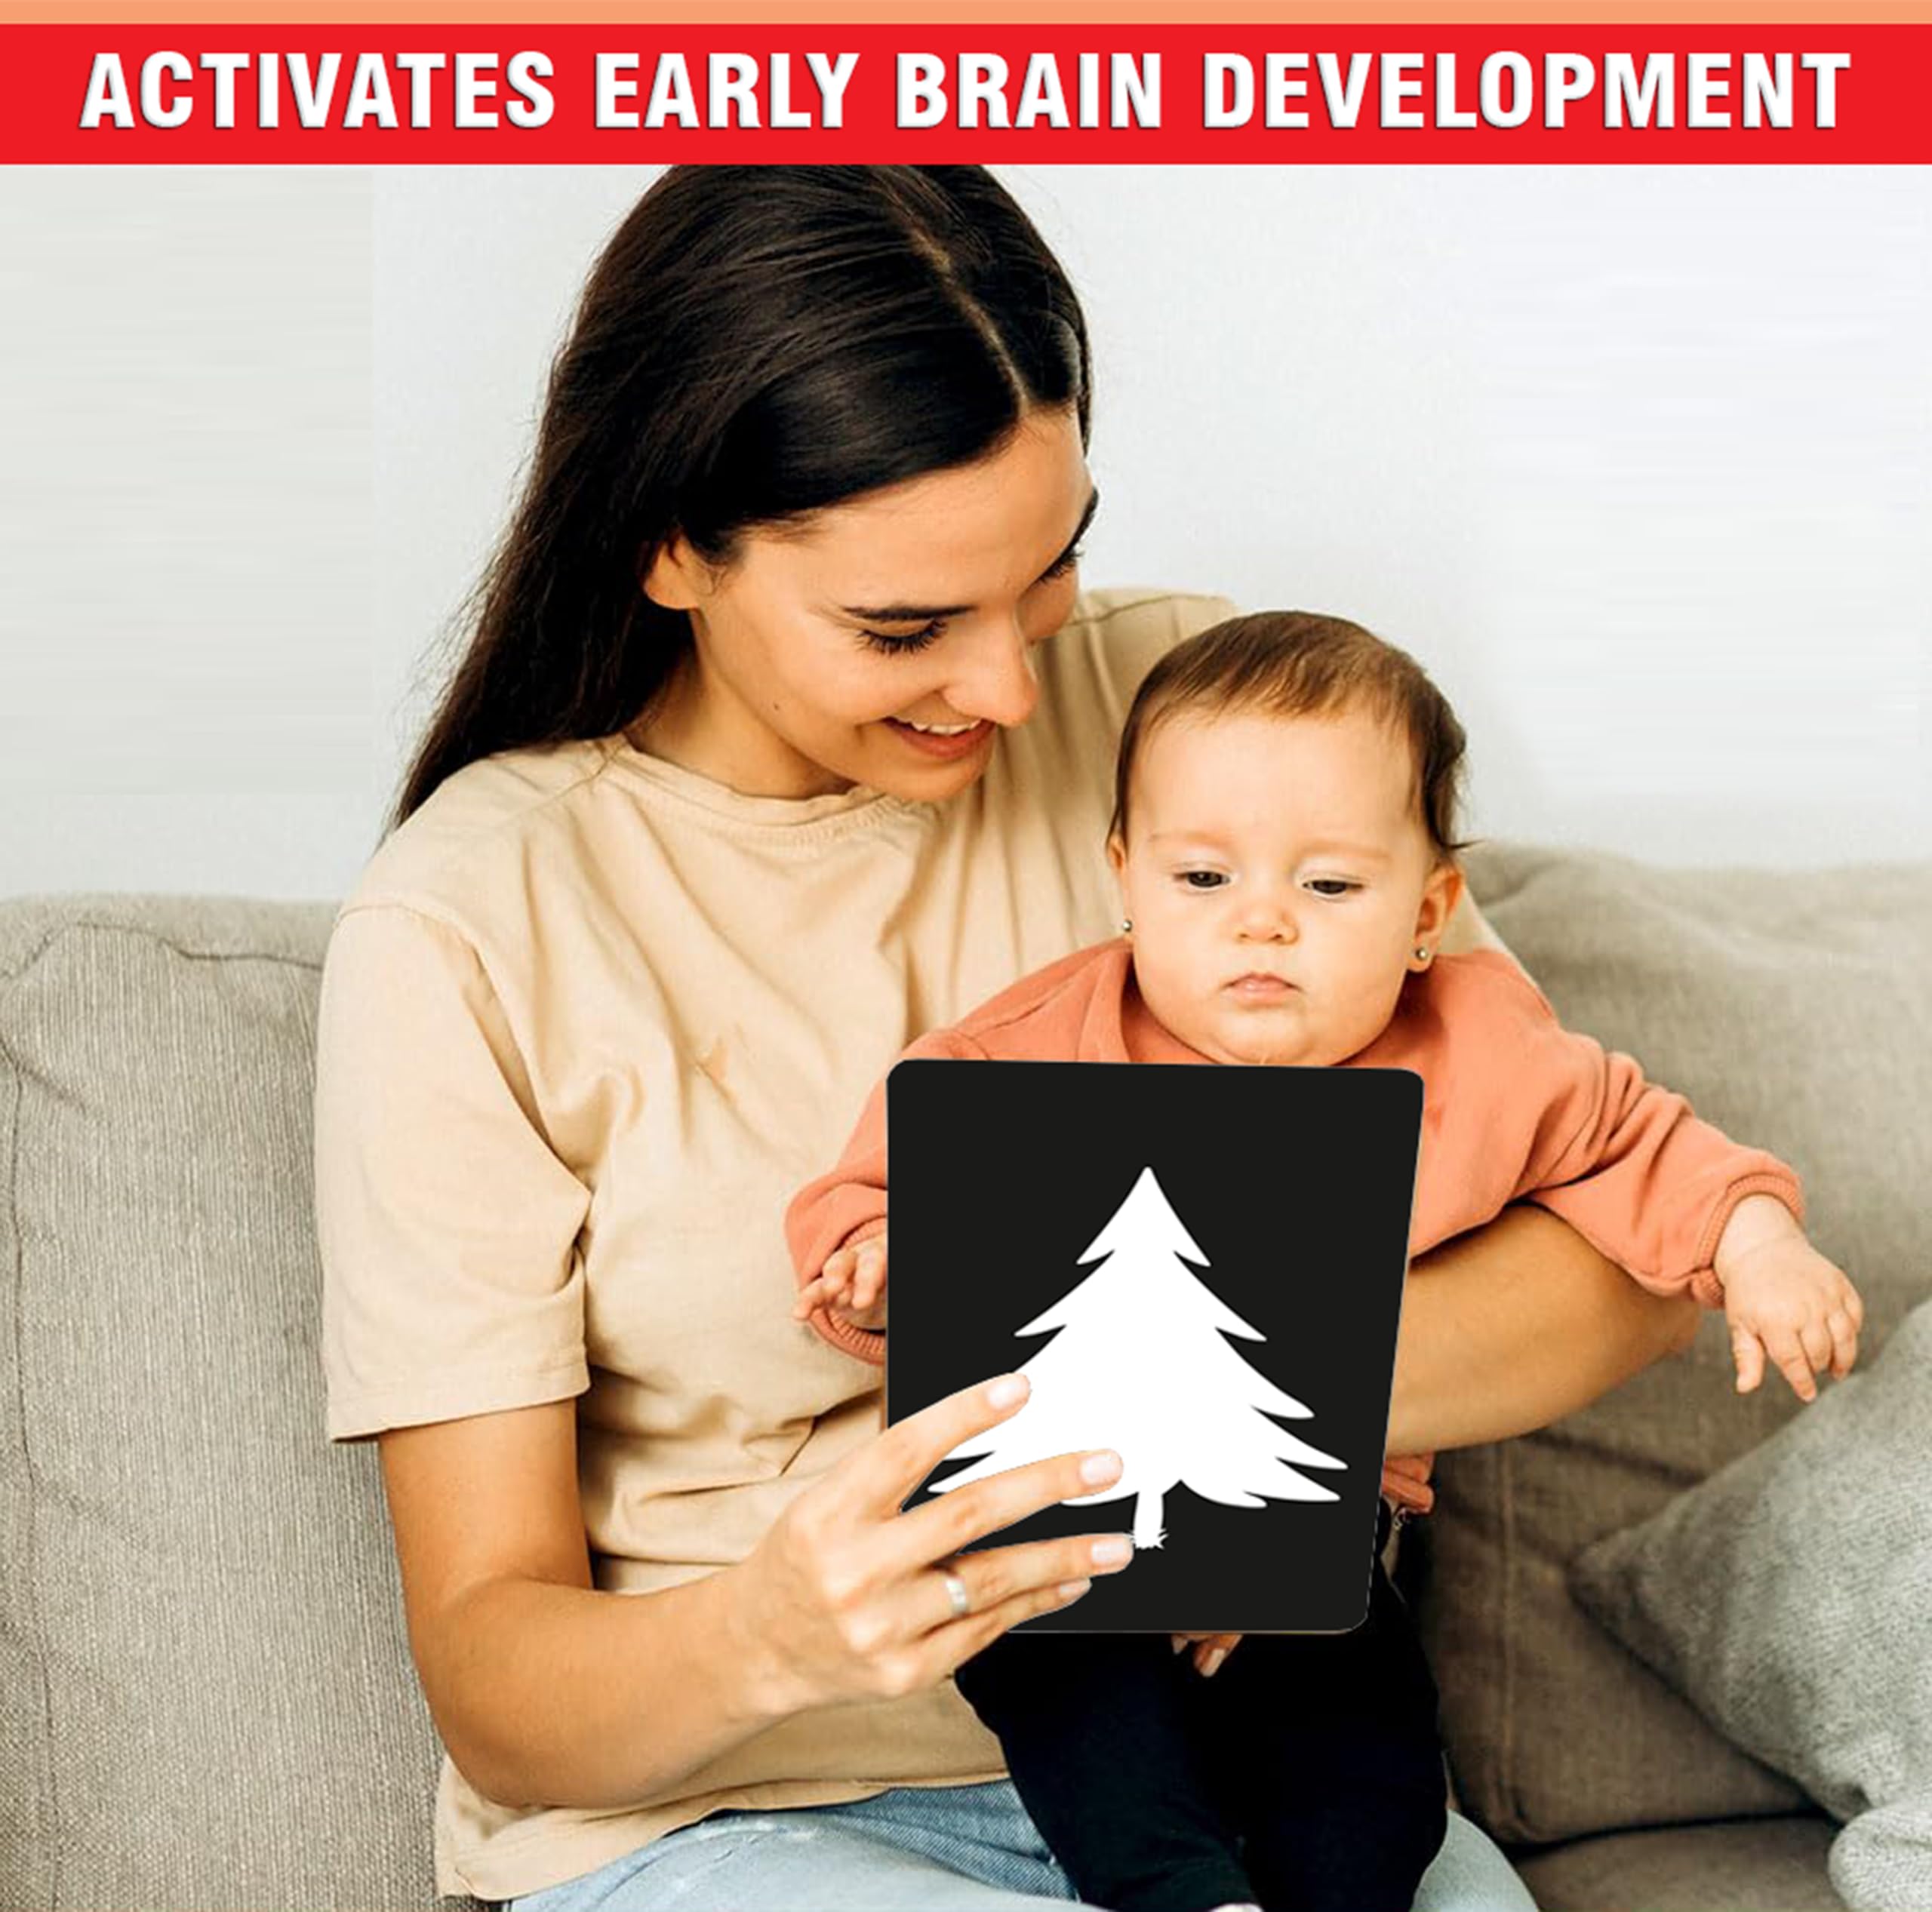 Gurukanth® Premium High Contrast Flash Cards for New Born Children - Black & White | 36 Objects | Age Group: 0-1 Year | Visual Stimulation and Sensory Development for Infants